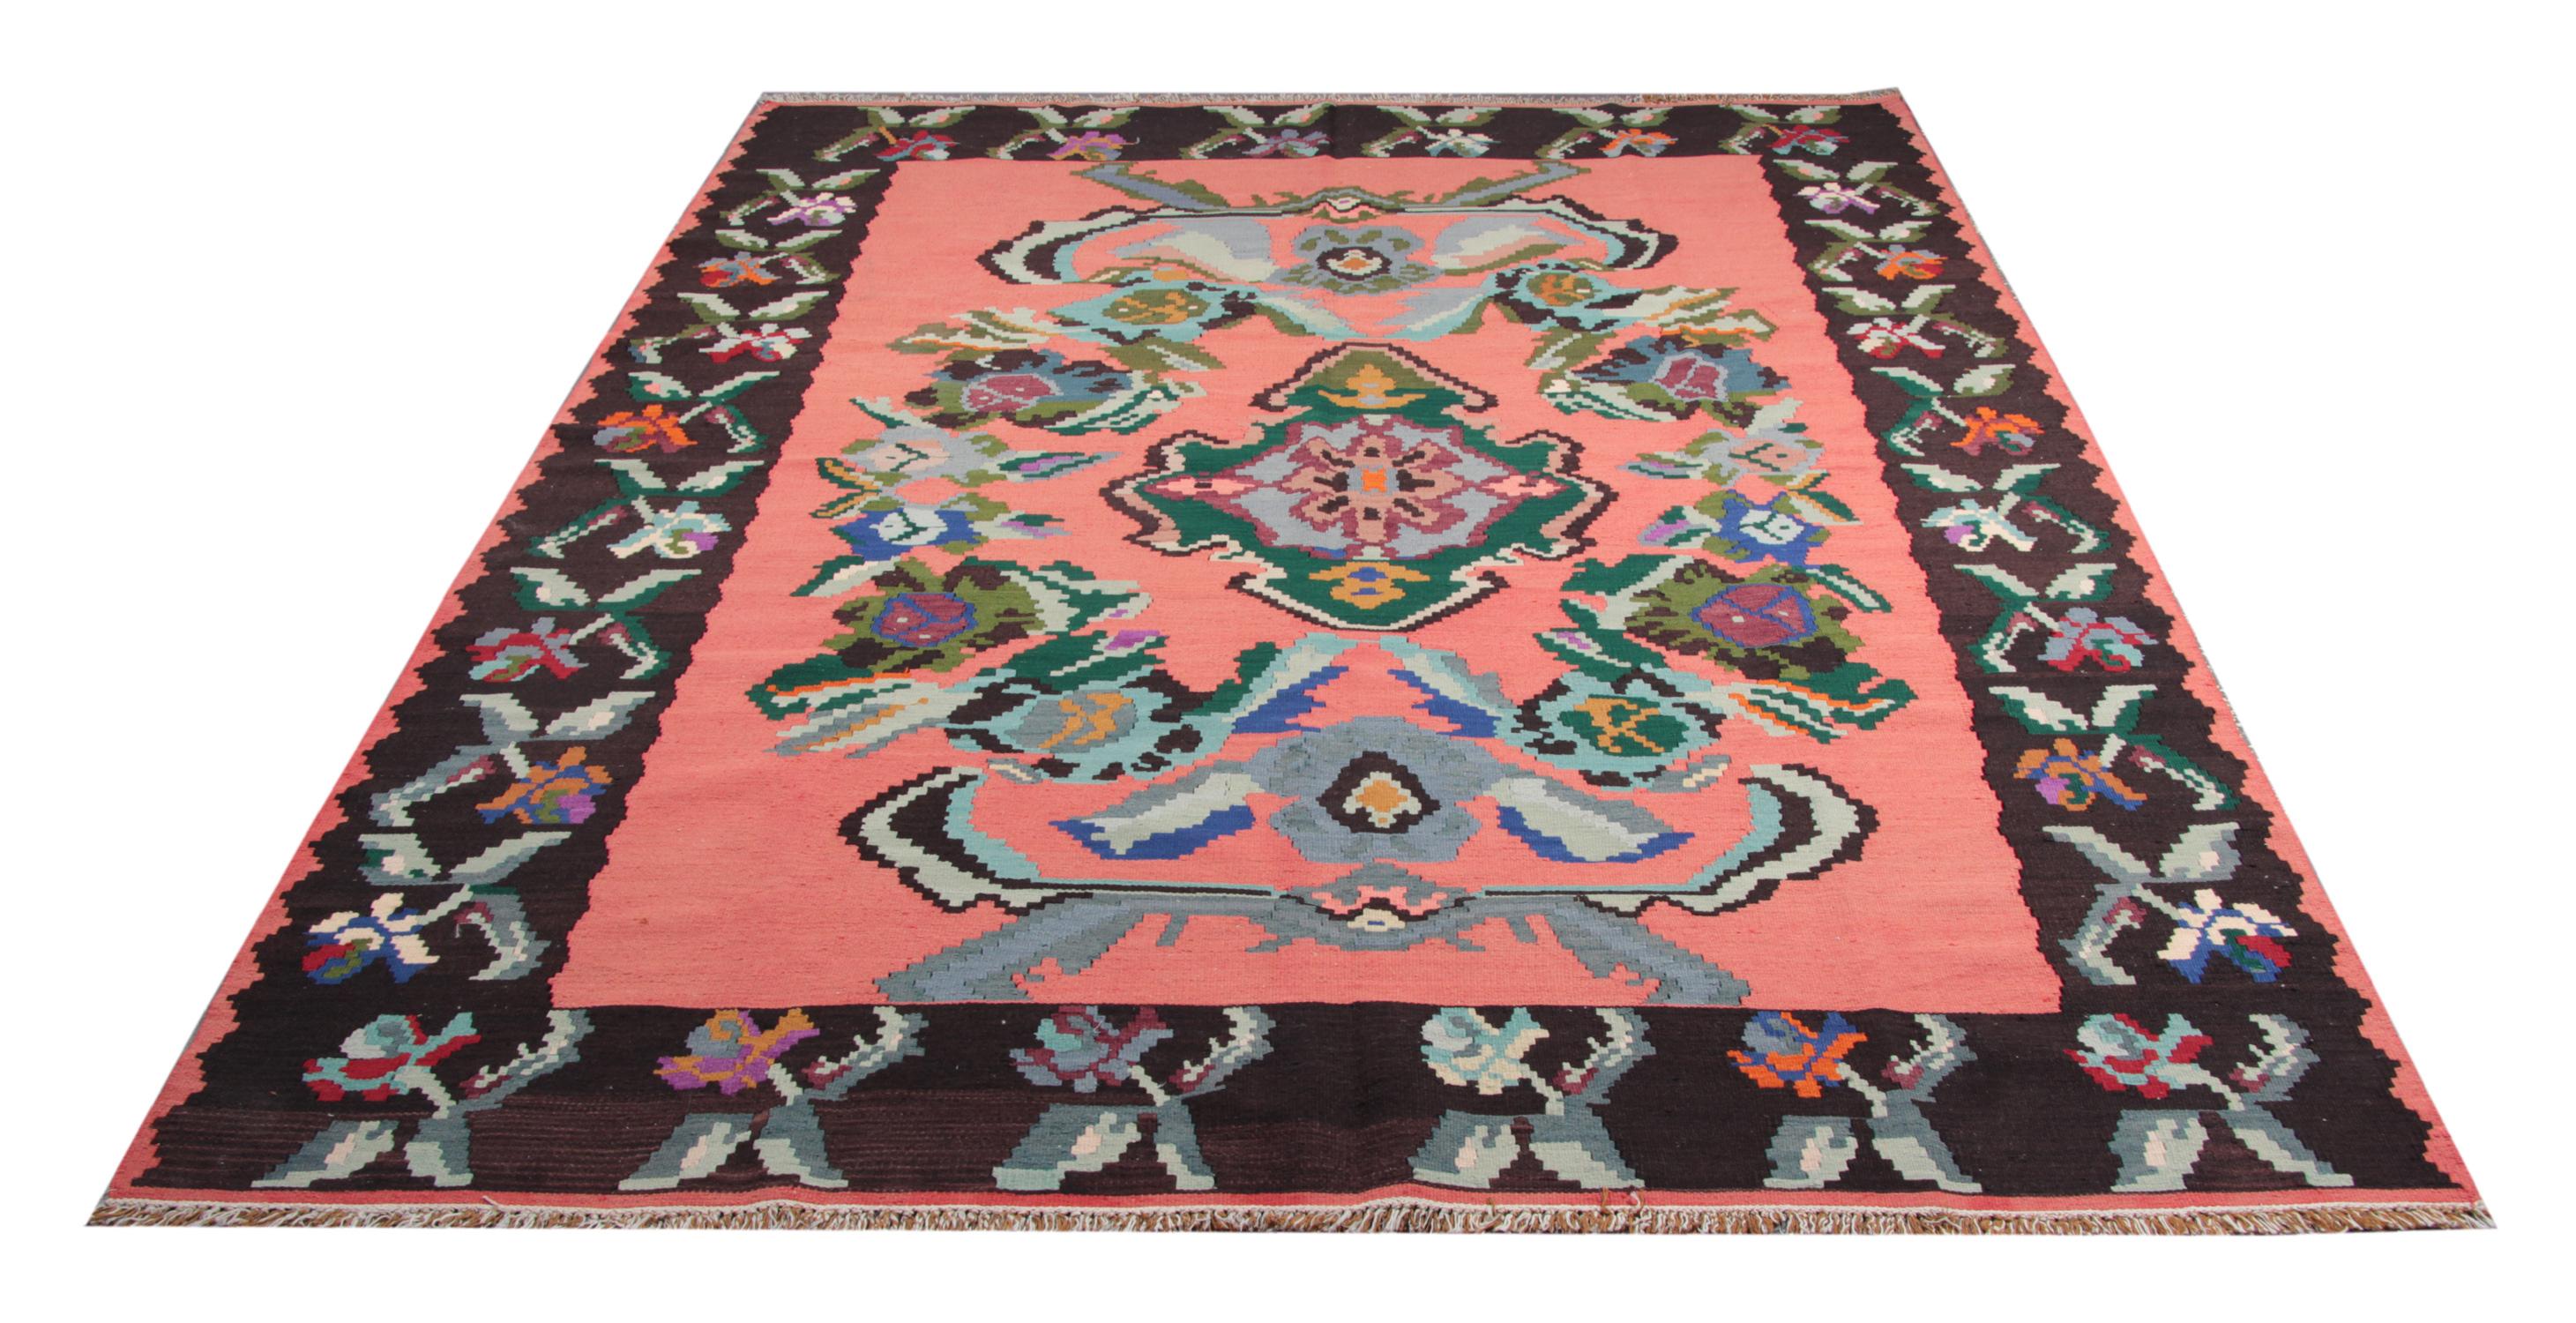 Hand-Knotted Vintage Kilim Rugs, Traditional Turkish Handmade Carpet Oriental Rug for Sale For Sale